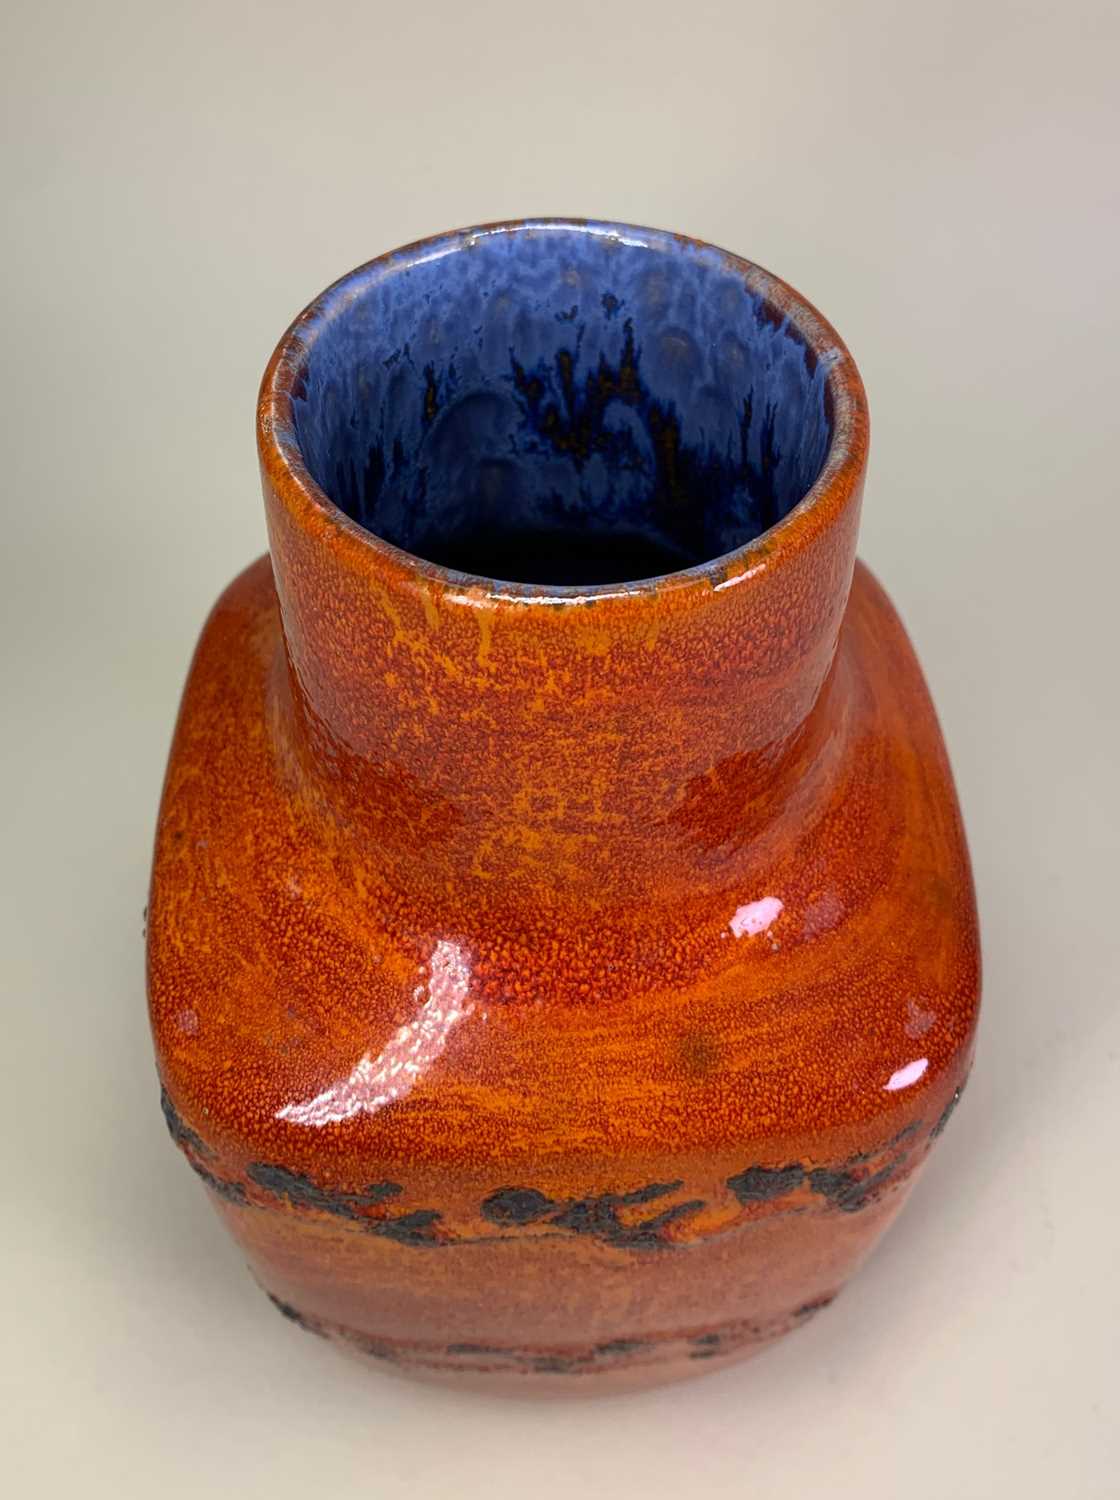 MID CENTURY POTTERY WGP KERAMICS COLLECTION including one Scheurich 275-28 solid red glazed vase - Image 6 of 20